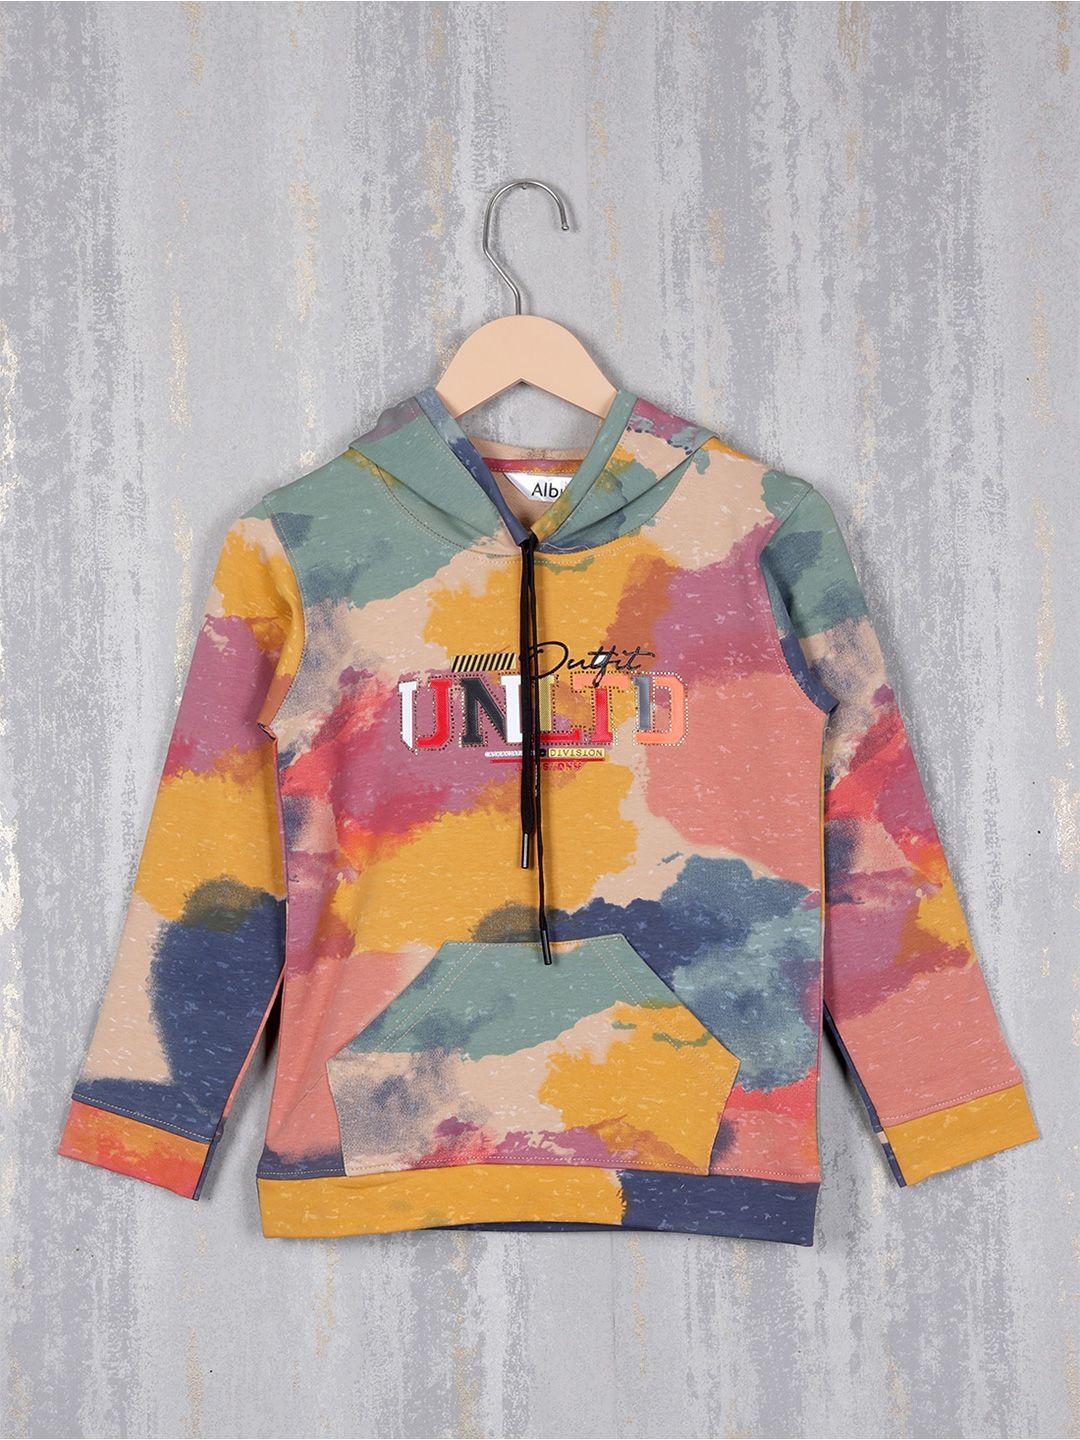 albion boys abstract printed hooded pullover sweatshirt